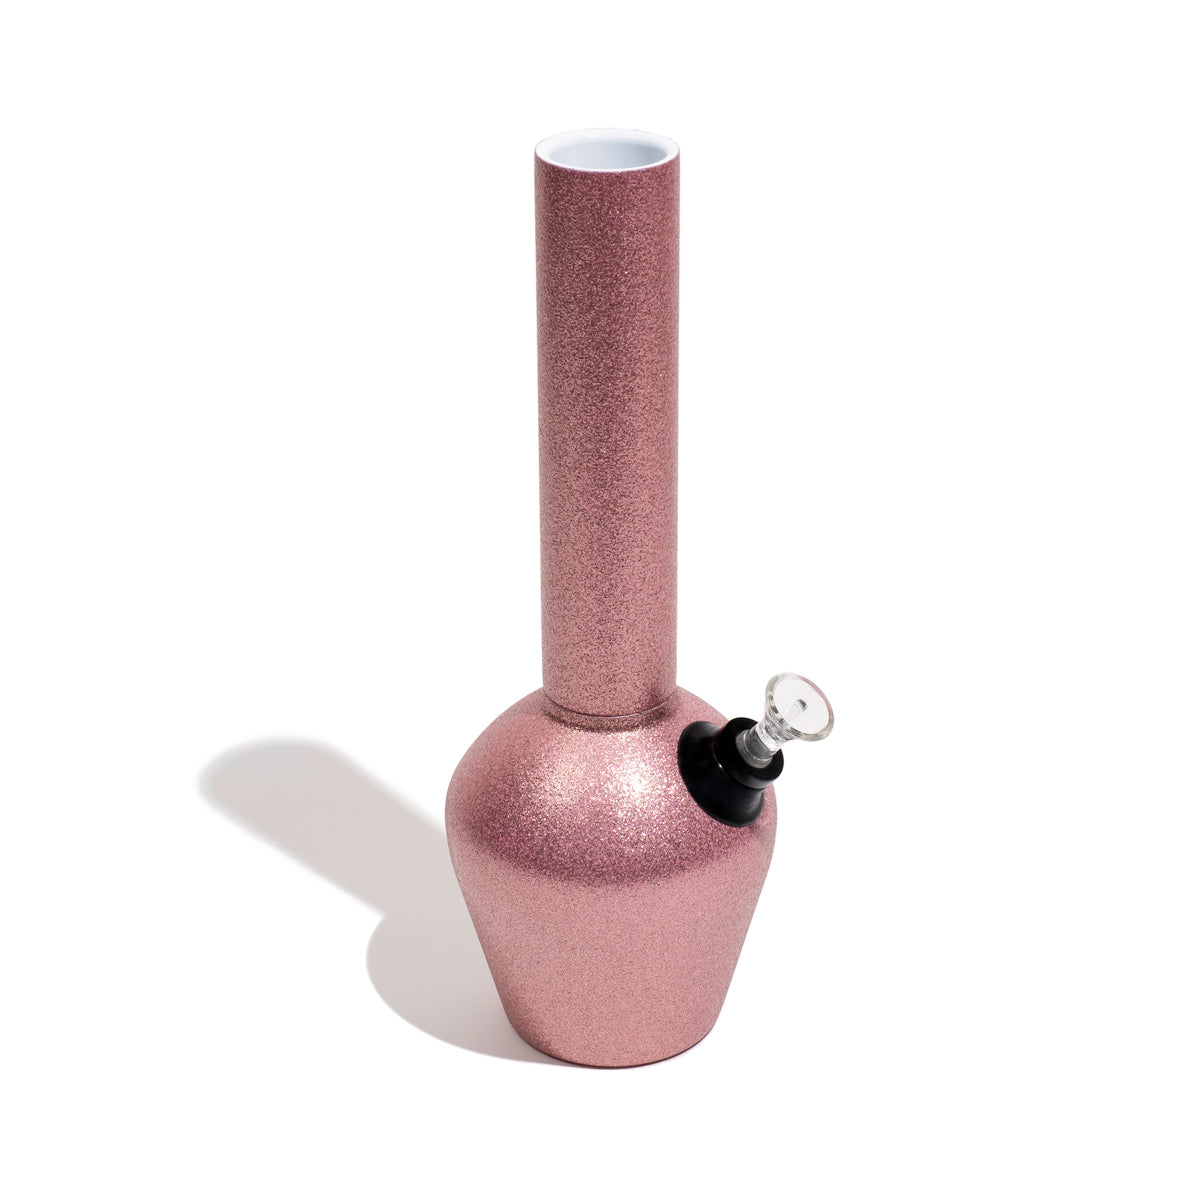 Chill - Limited Edition - Pink Glitterbomb Bong